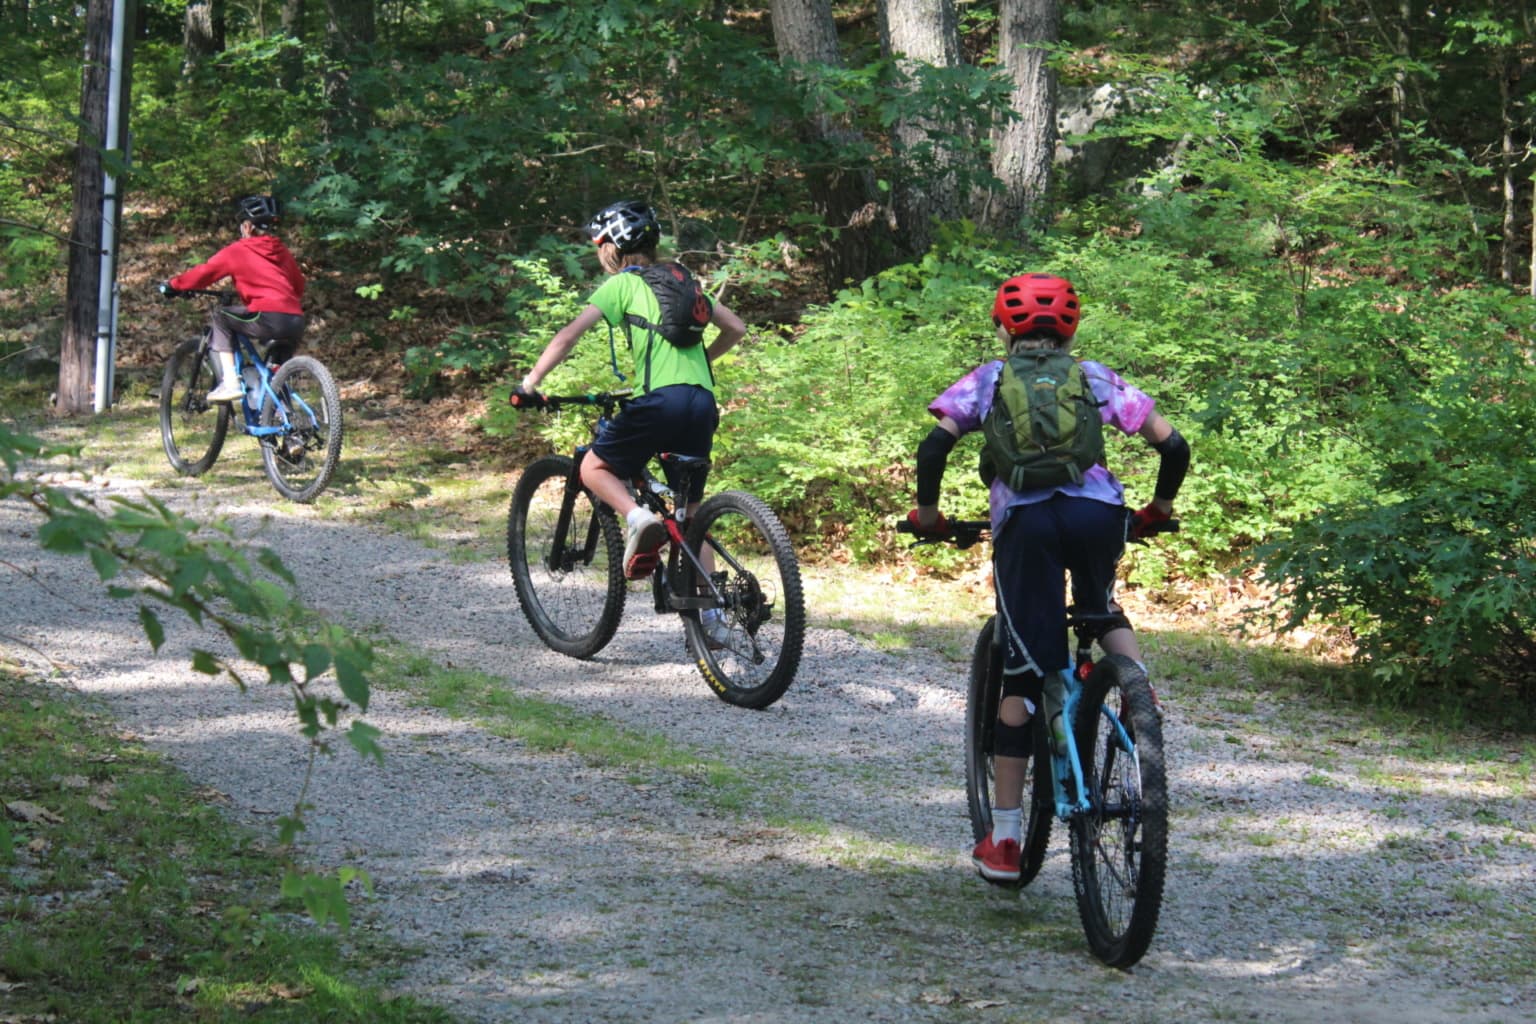 Campers ride along a trail on mountain bikes.